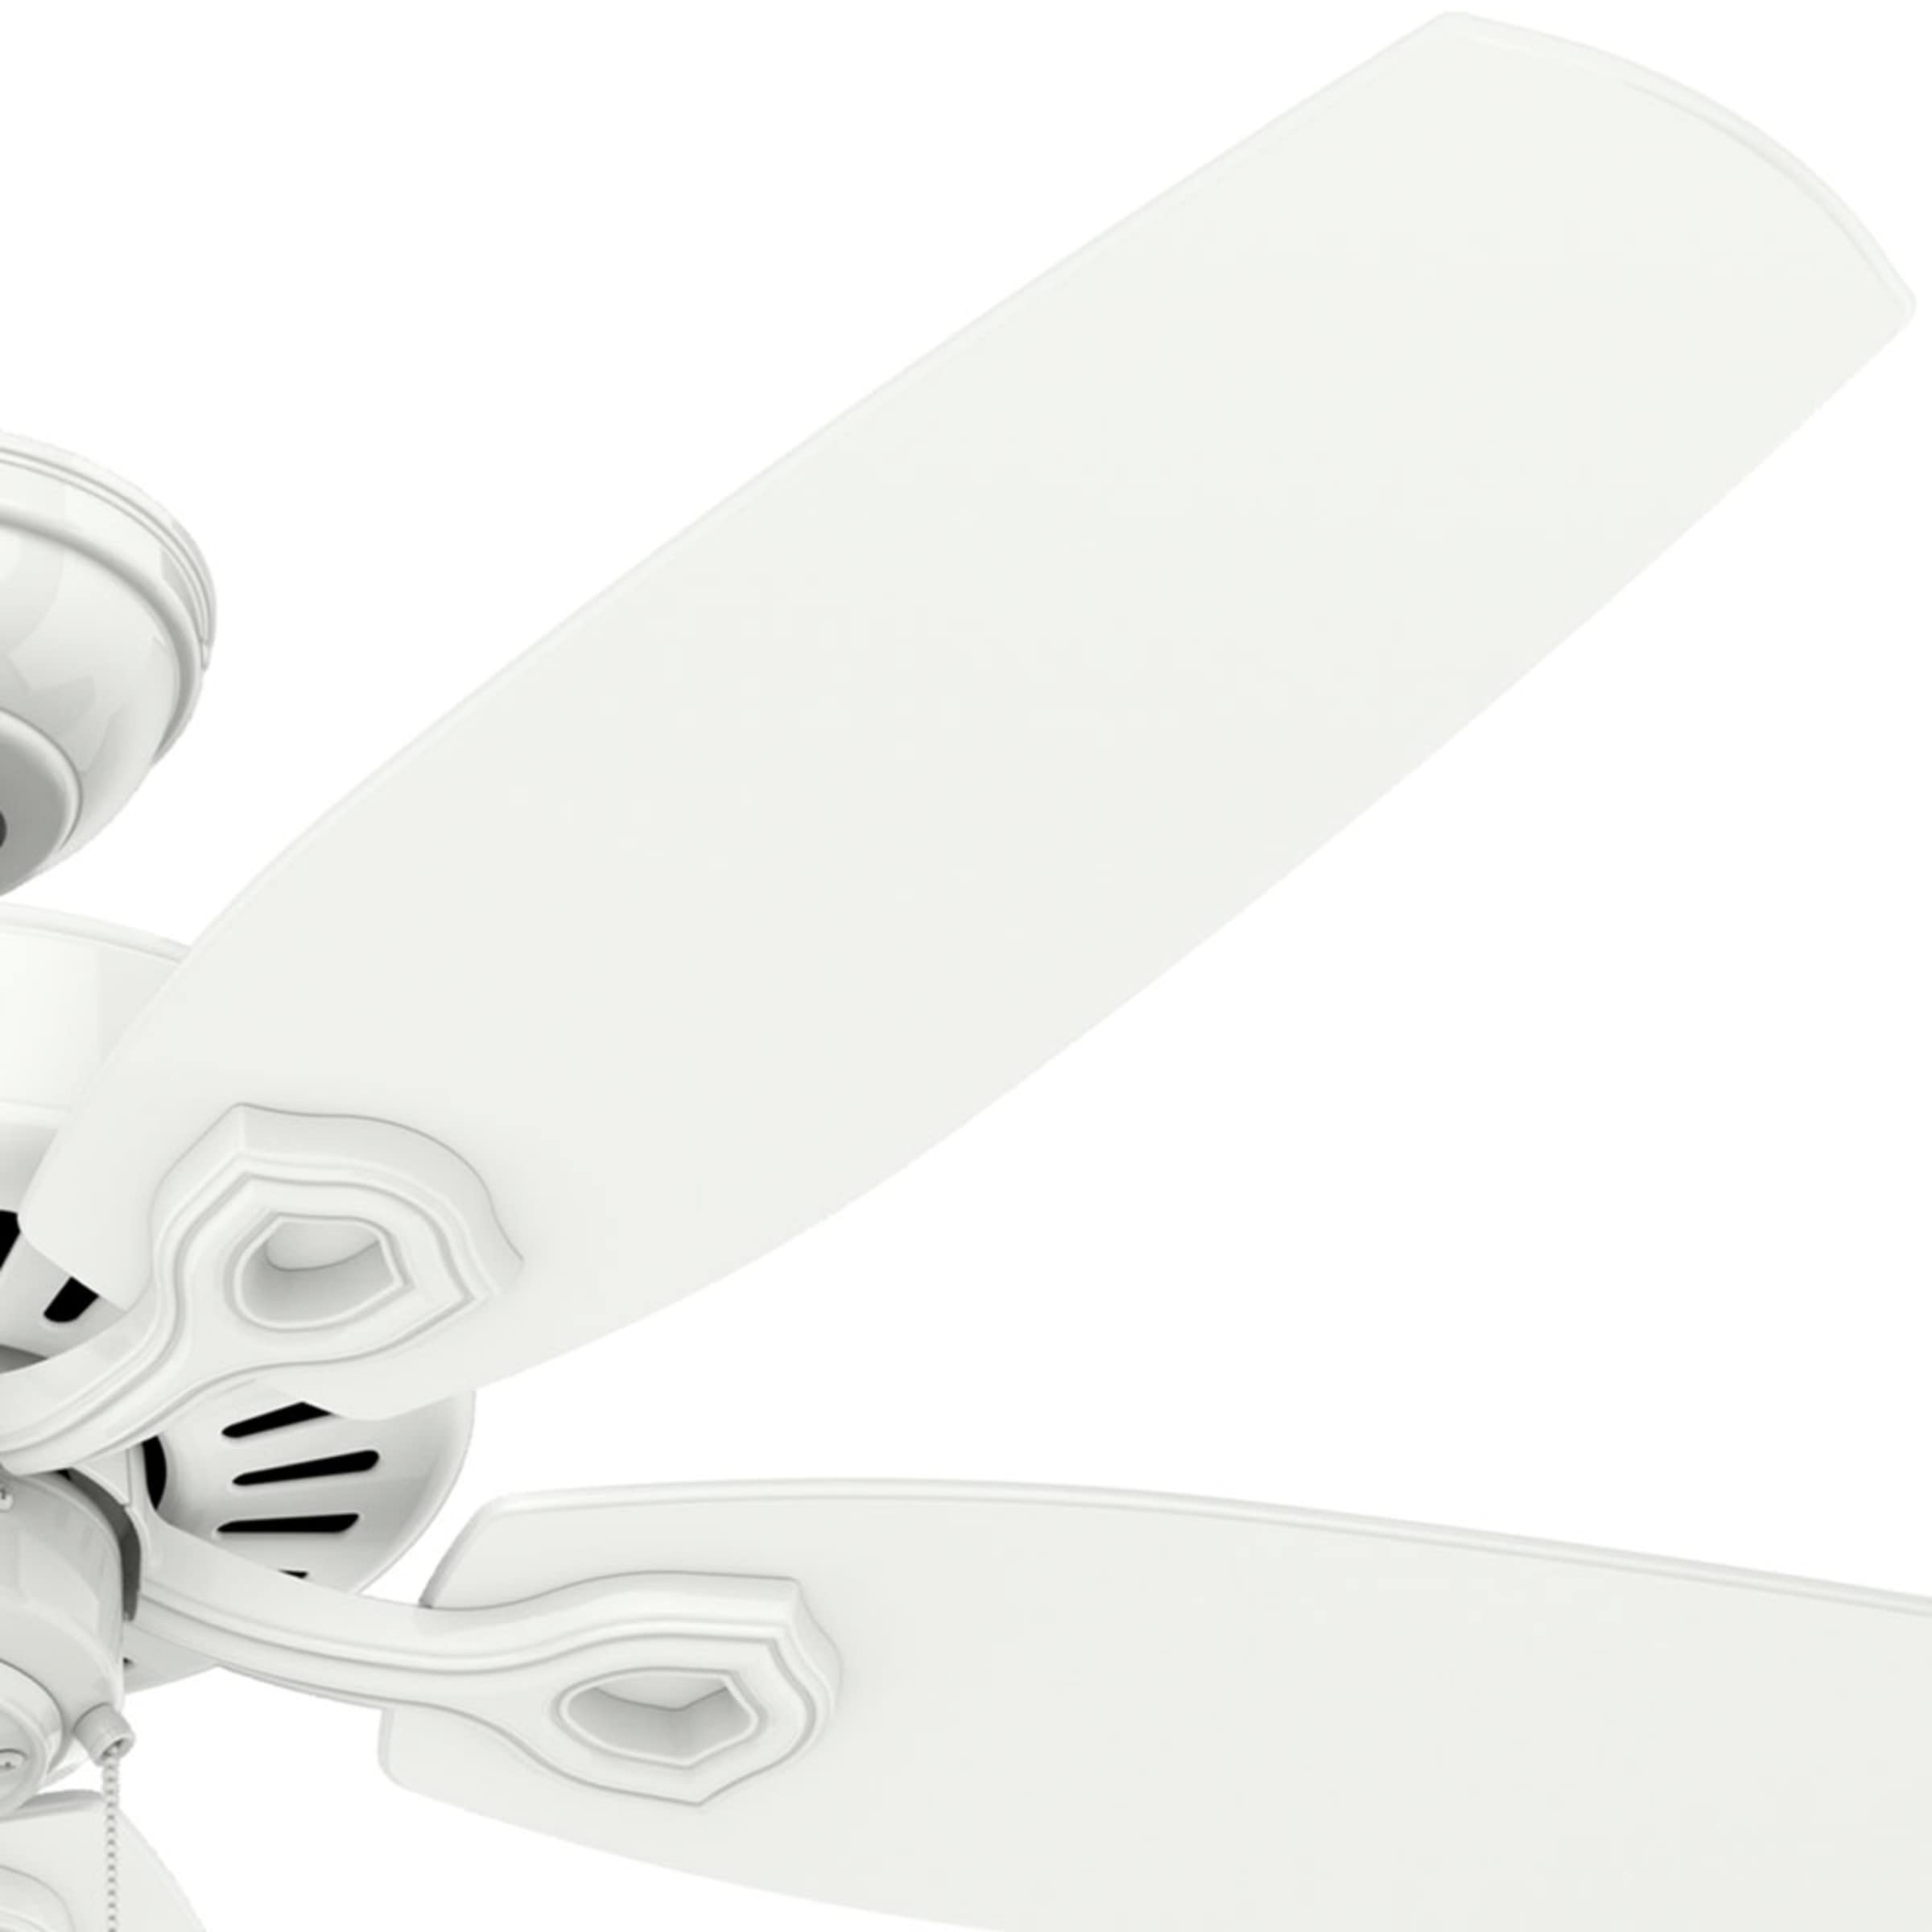 Hunter Fan Company 53240 Builder Elite Indoor Ceiling Fan with Pull Chain Control, 52